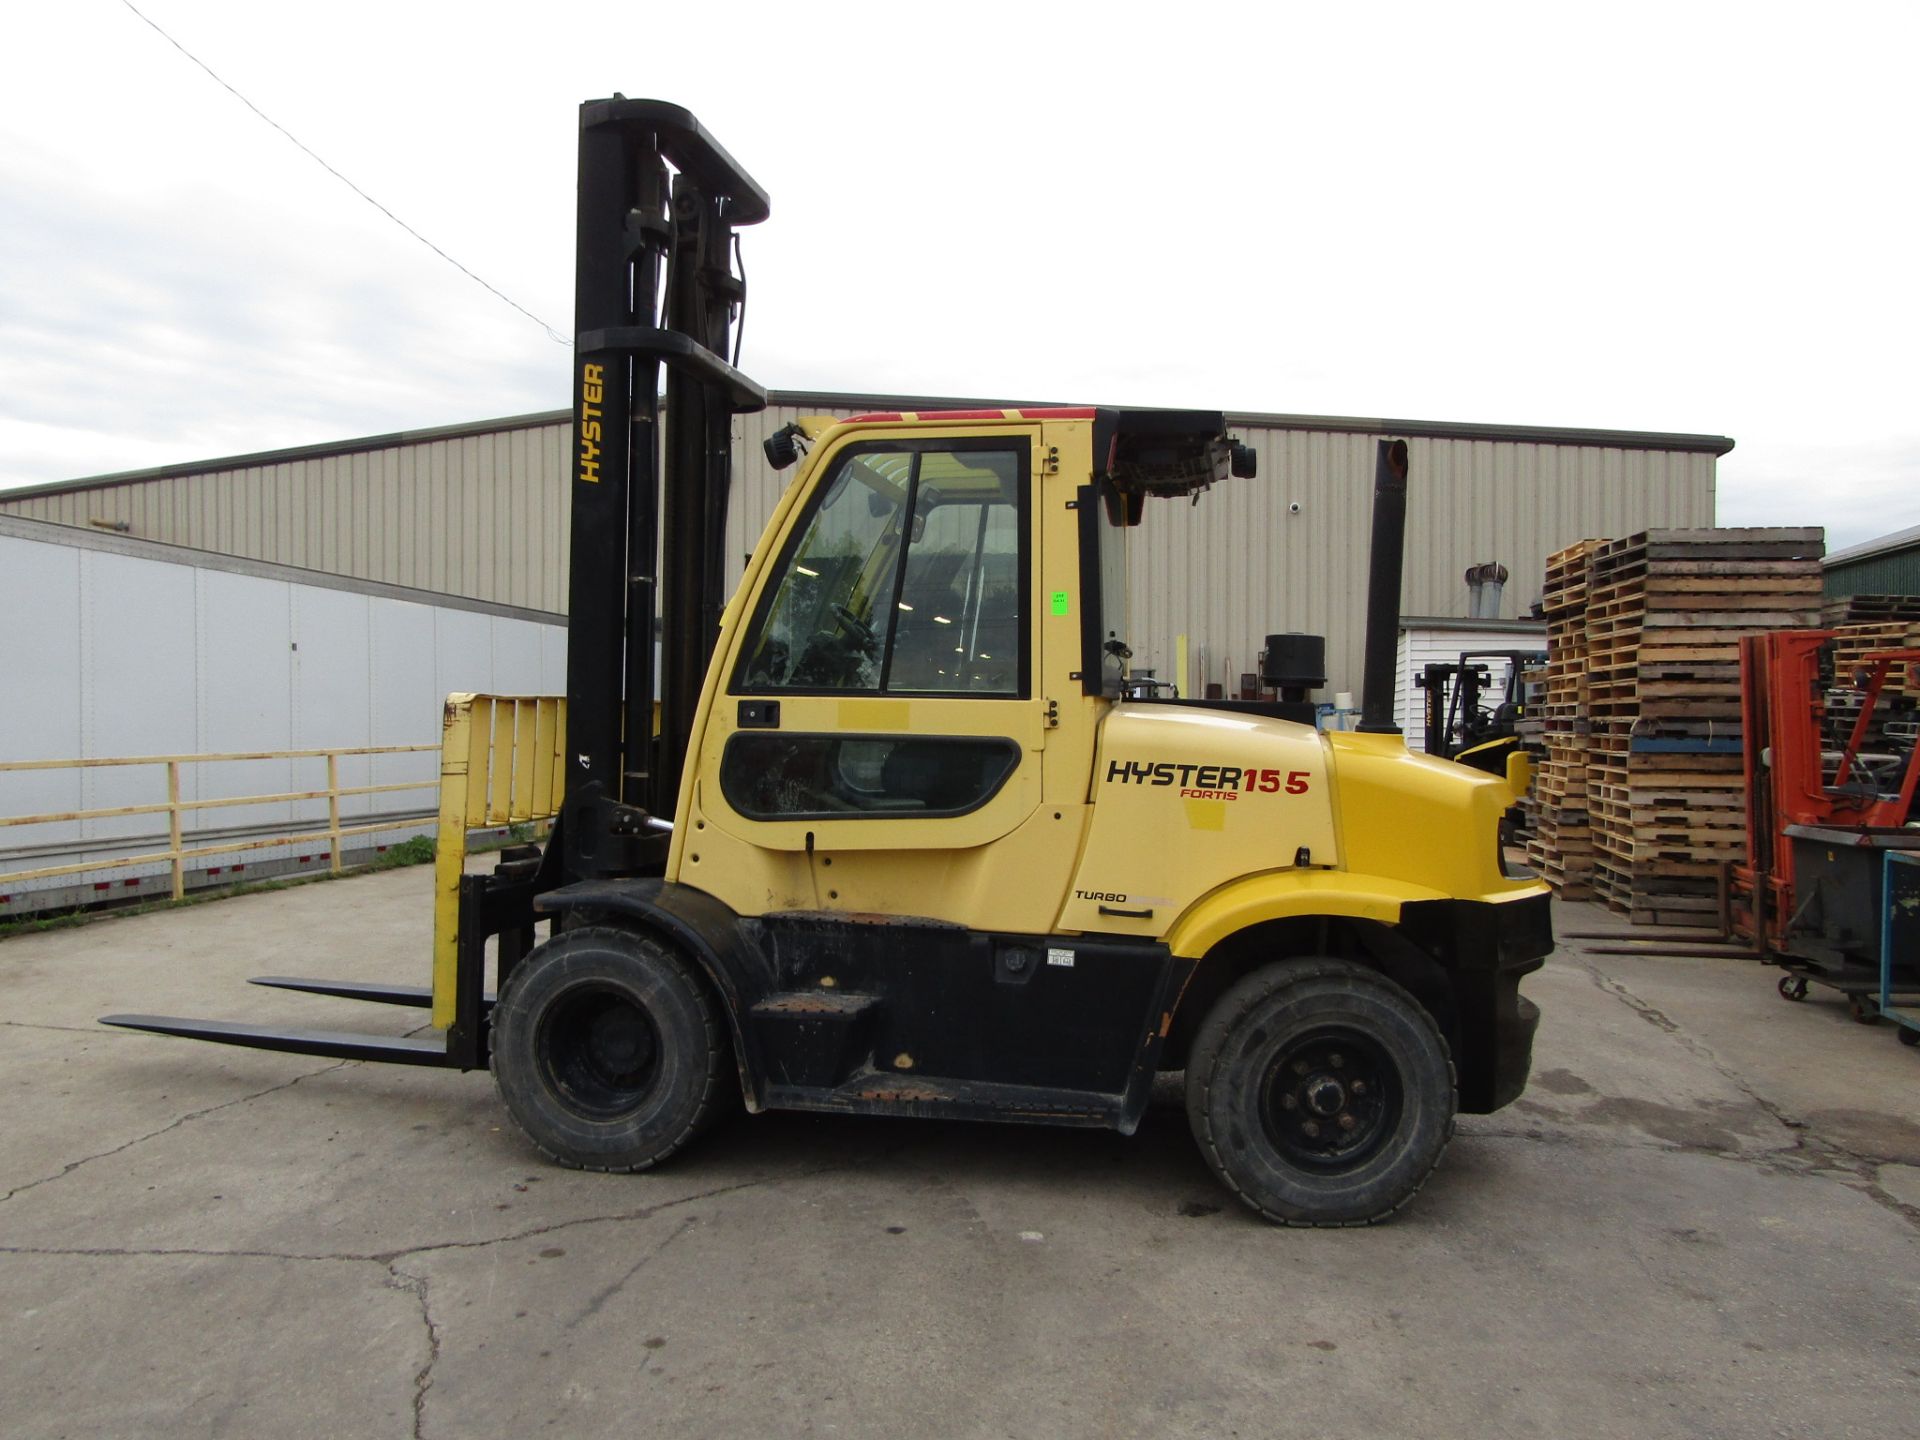 2012 Hyster 15500lbs Capacity OUTDOOR Forklift A/C & Heated CAB with sideshift & 72" forks LOW HOURS